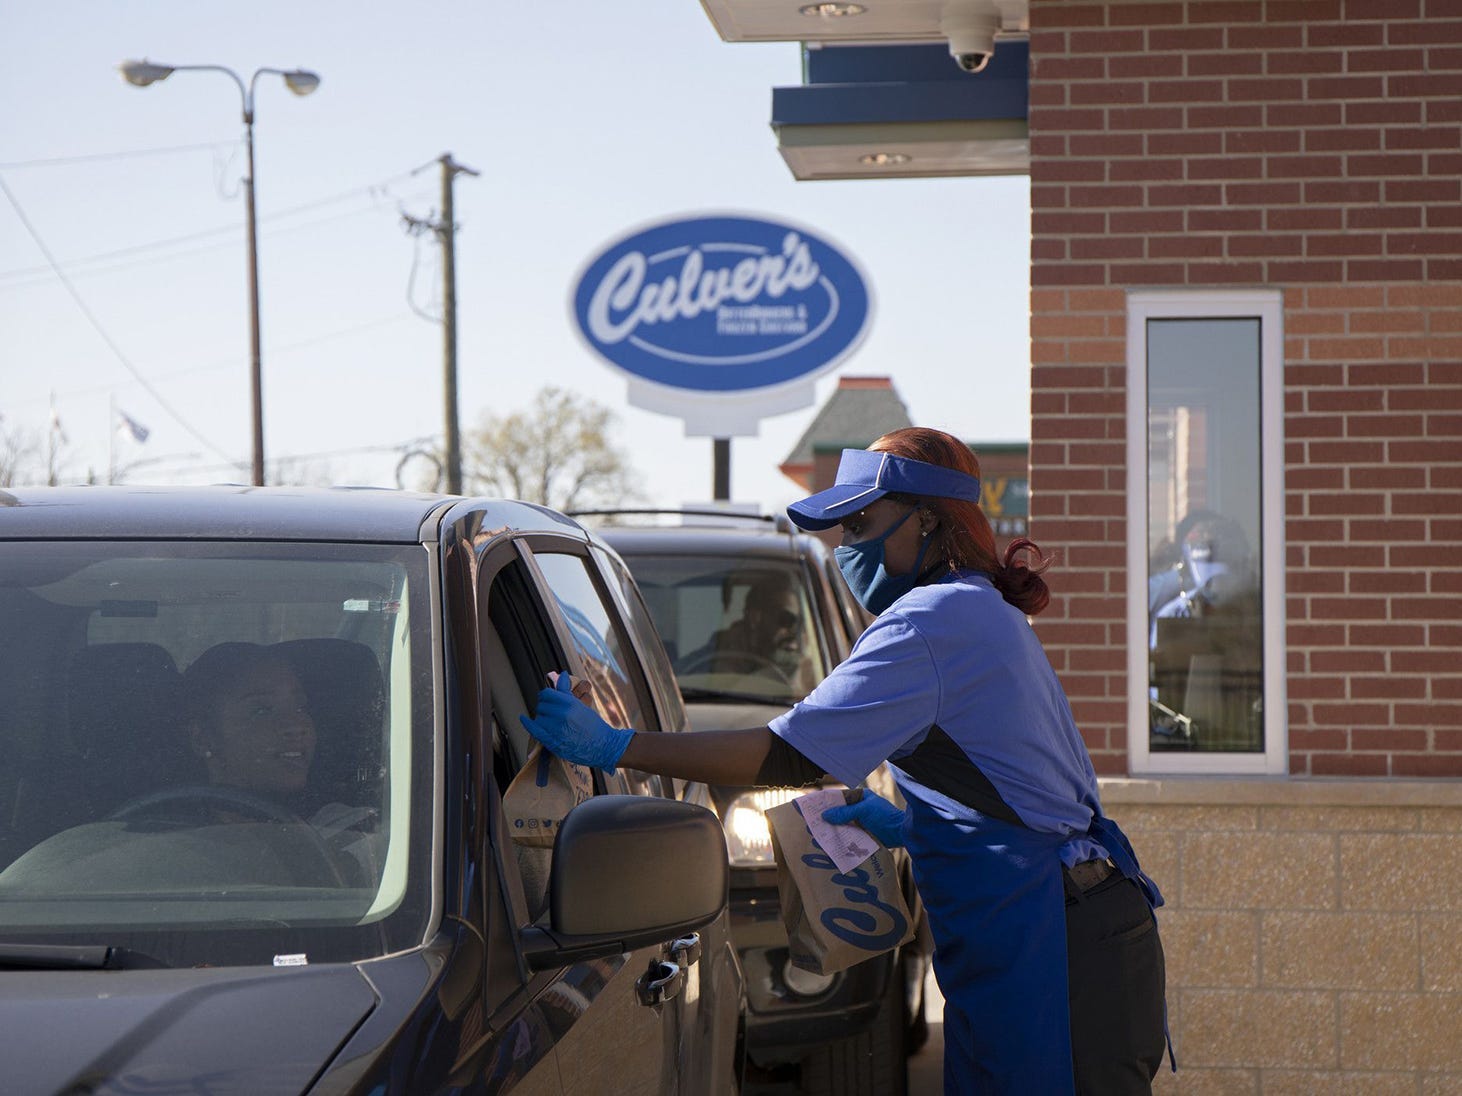 Culver's employee Teesha Nelson hands a drive-thru customer their order on Nov. 8, 2021, outside the restaurant chain;s newest location in Pullman on its opening day.